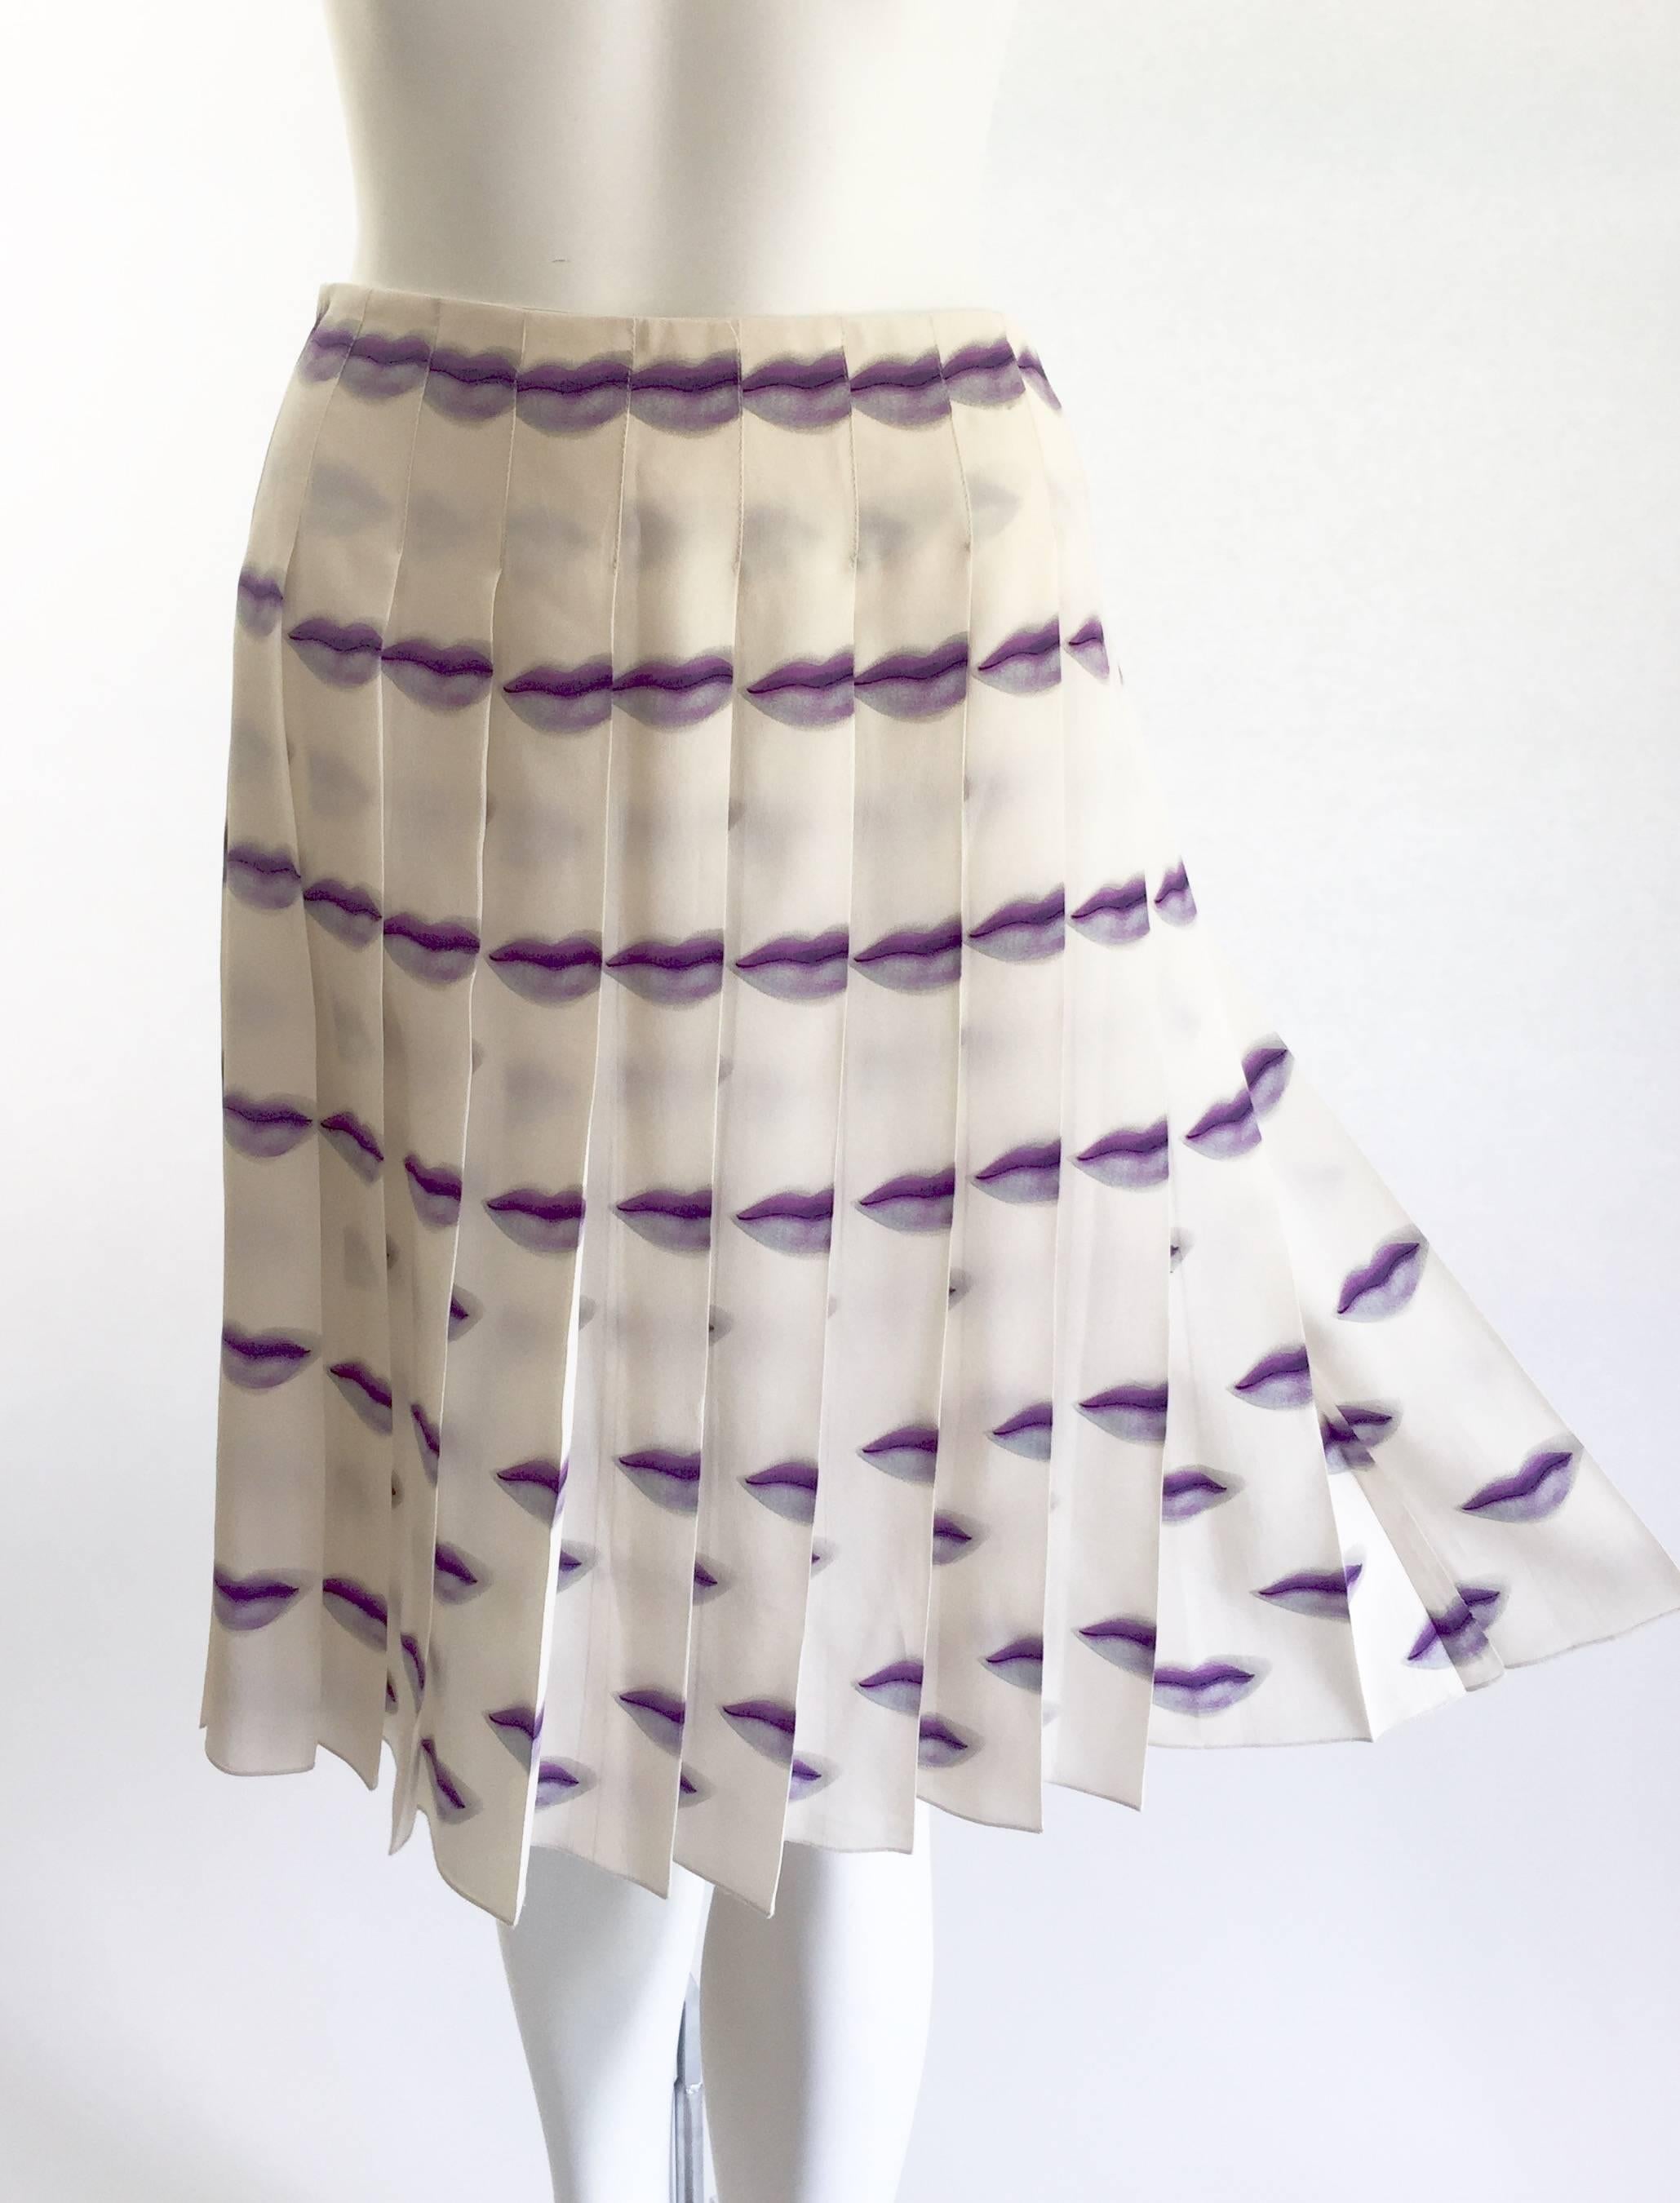 The most coveted Prada, Spring/Summer 2000 silk skirt with a violet purple lip print throughout. Grosgrain interior waistband, top stitch pleating and hidden side snap closures.
The same skirt in a different color was featured in the